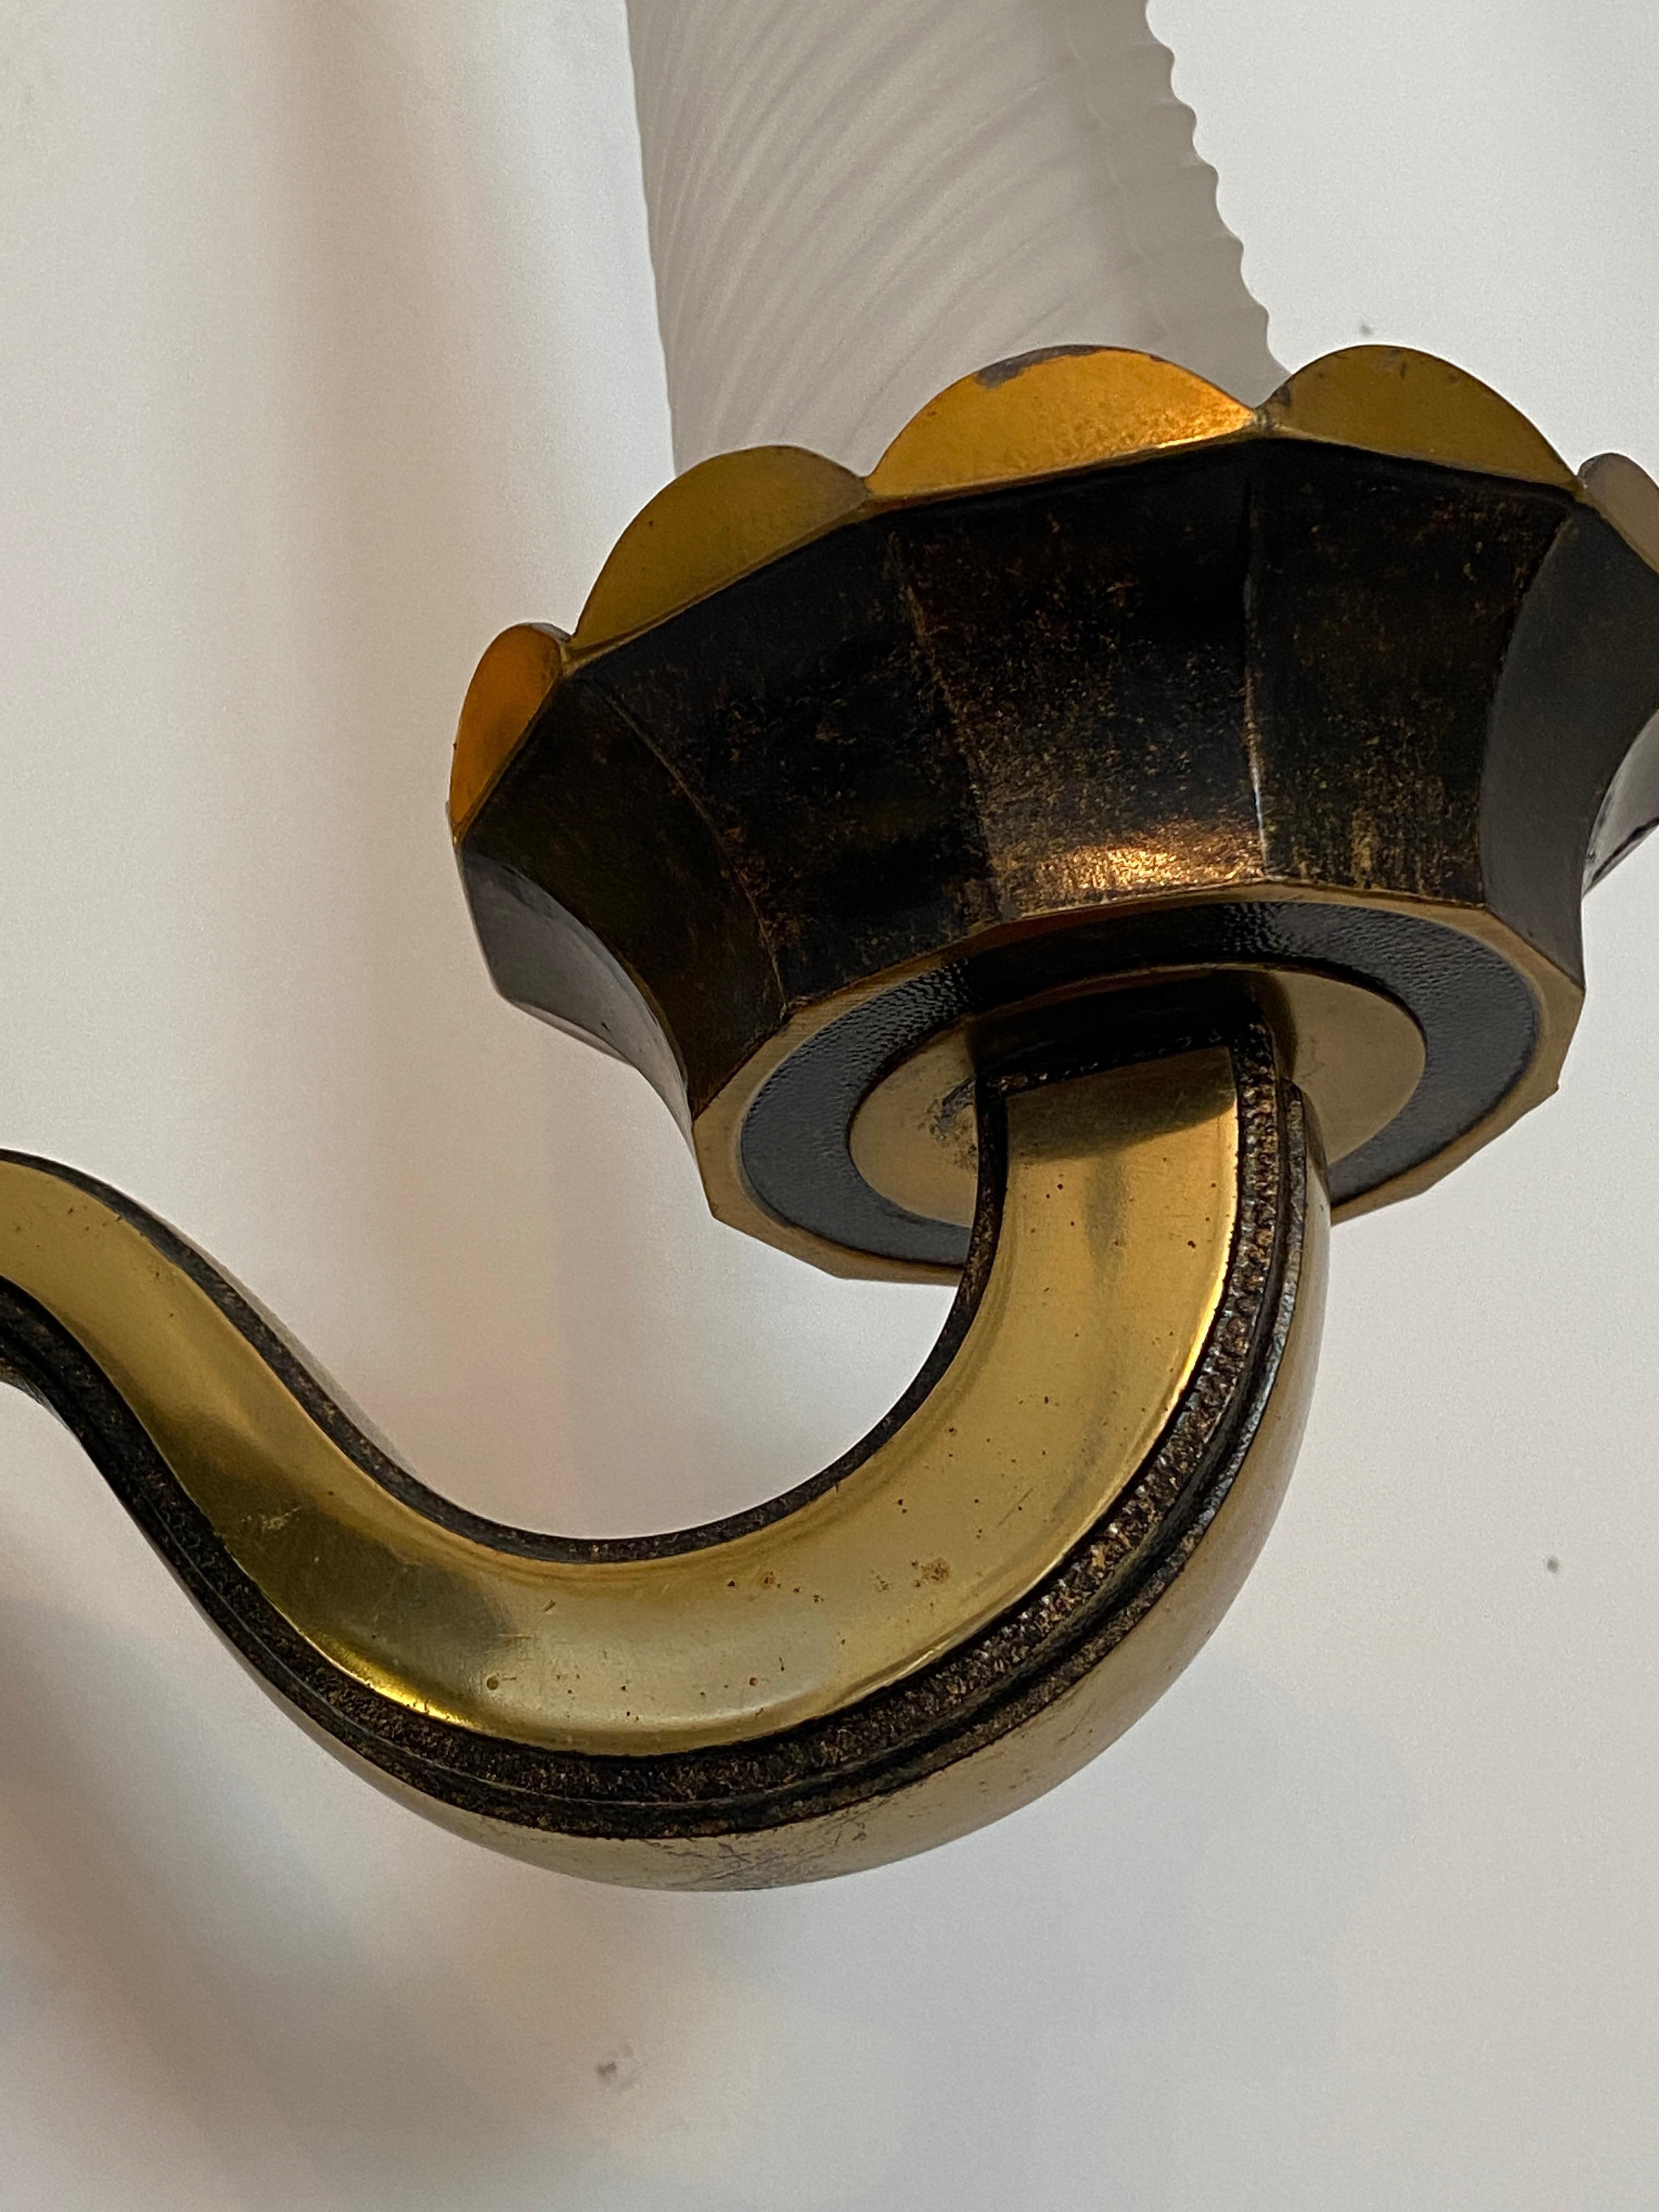 Pair of Art Deco Moderne Wall Sconces In Good Condition For Sale In West Palm Beach, FL